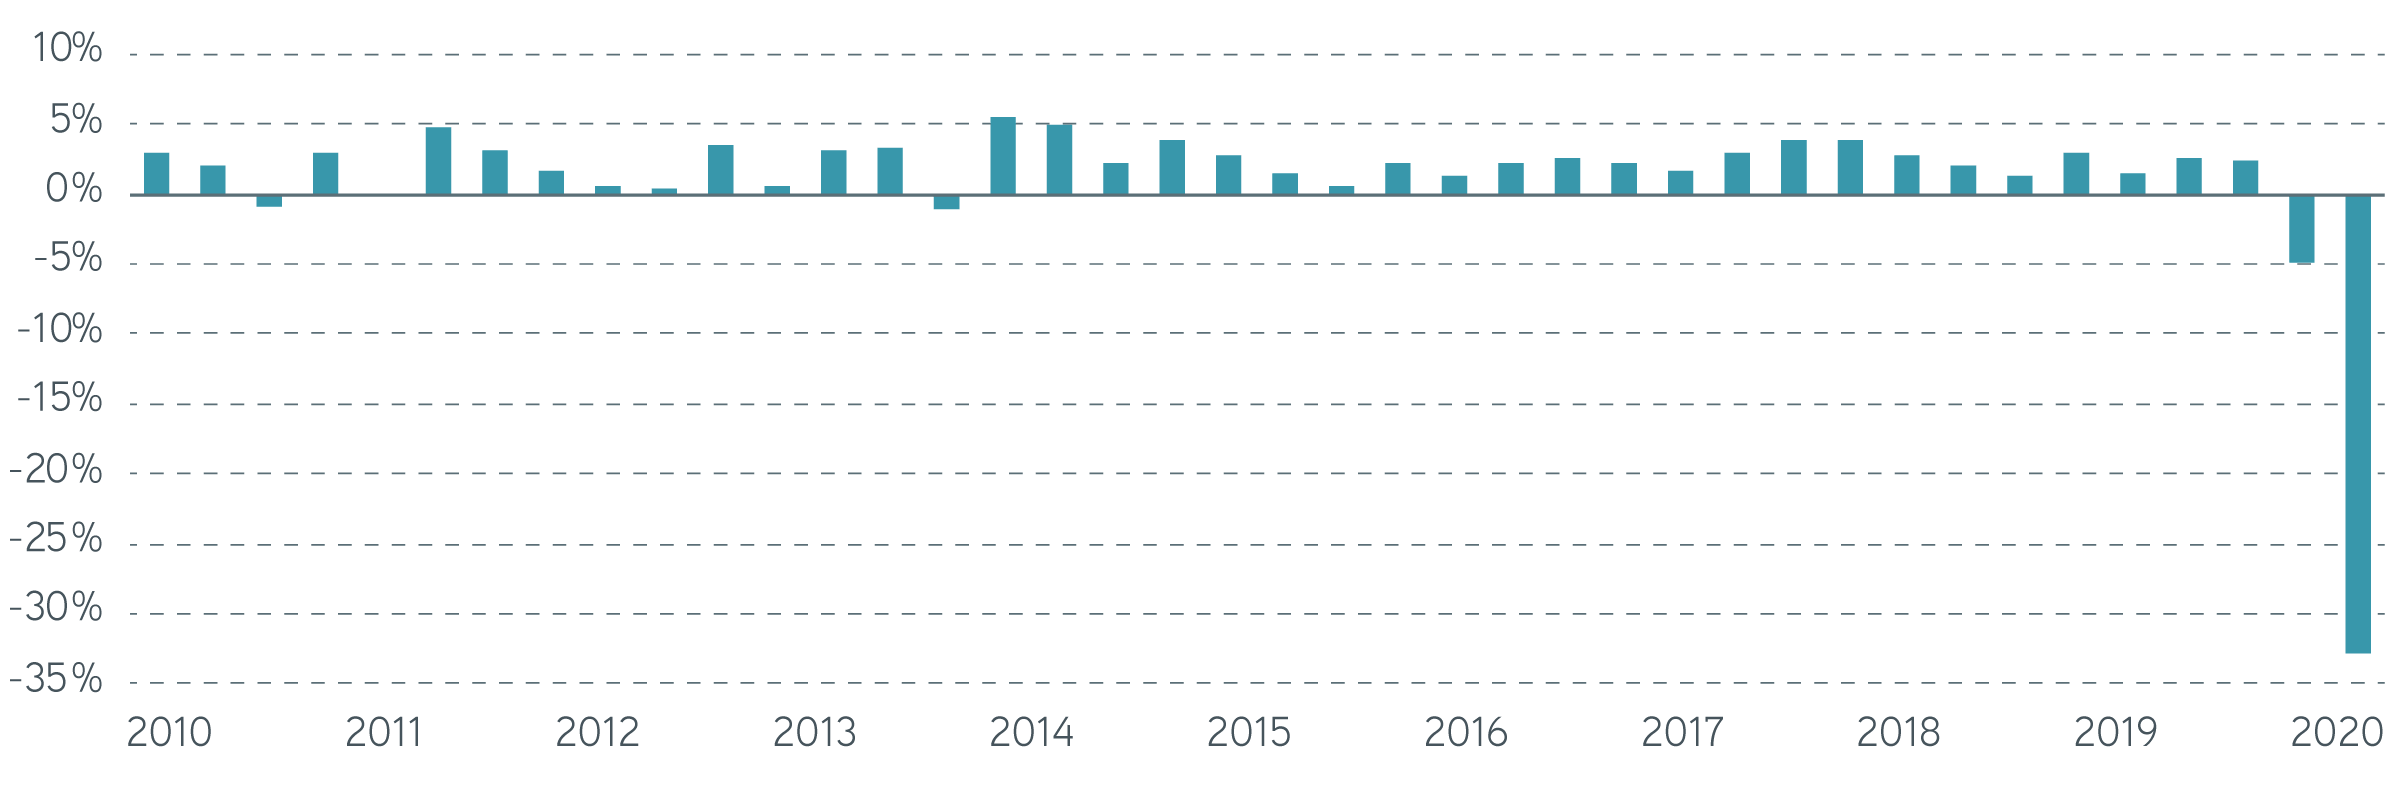 US real GDP growth, annualized